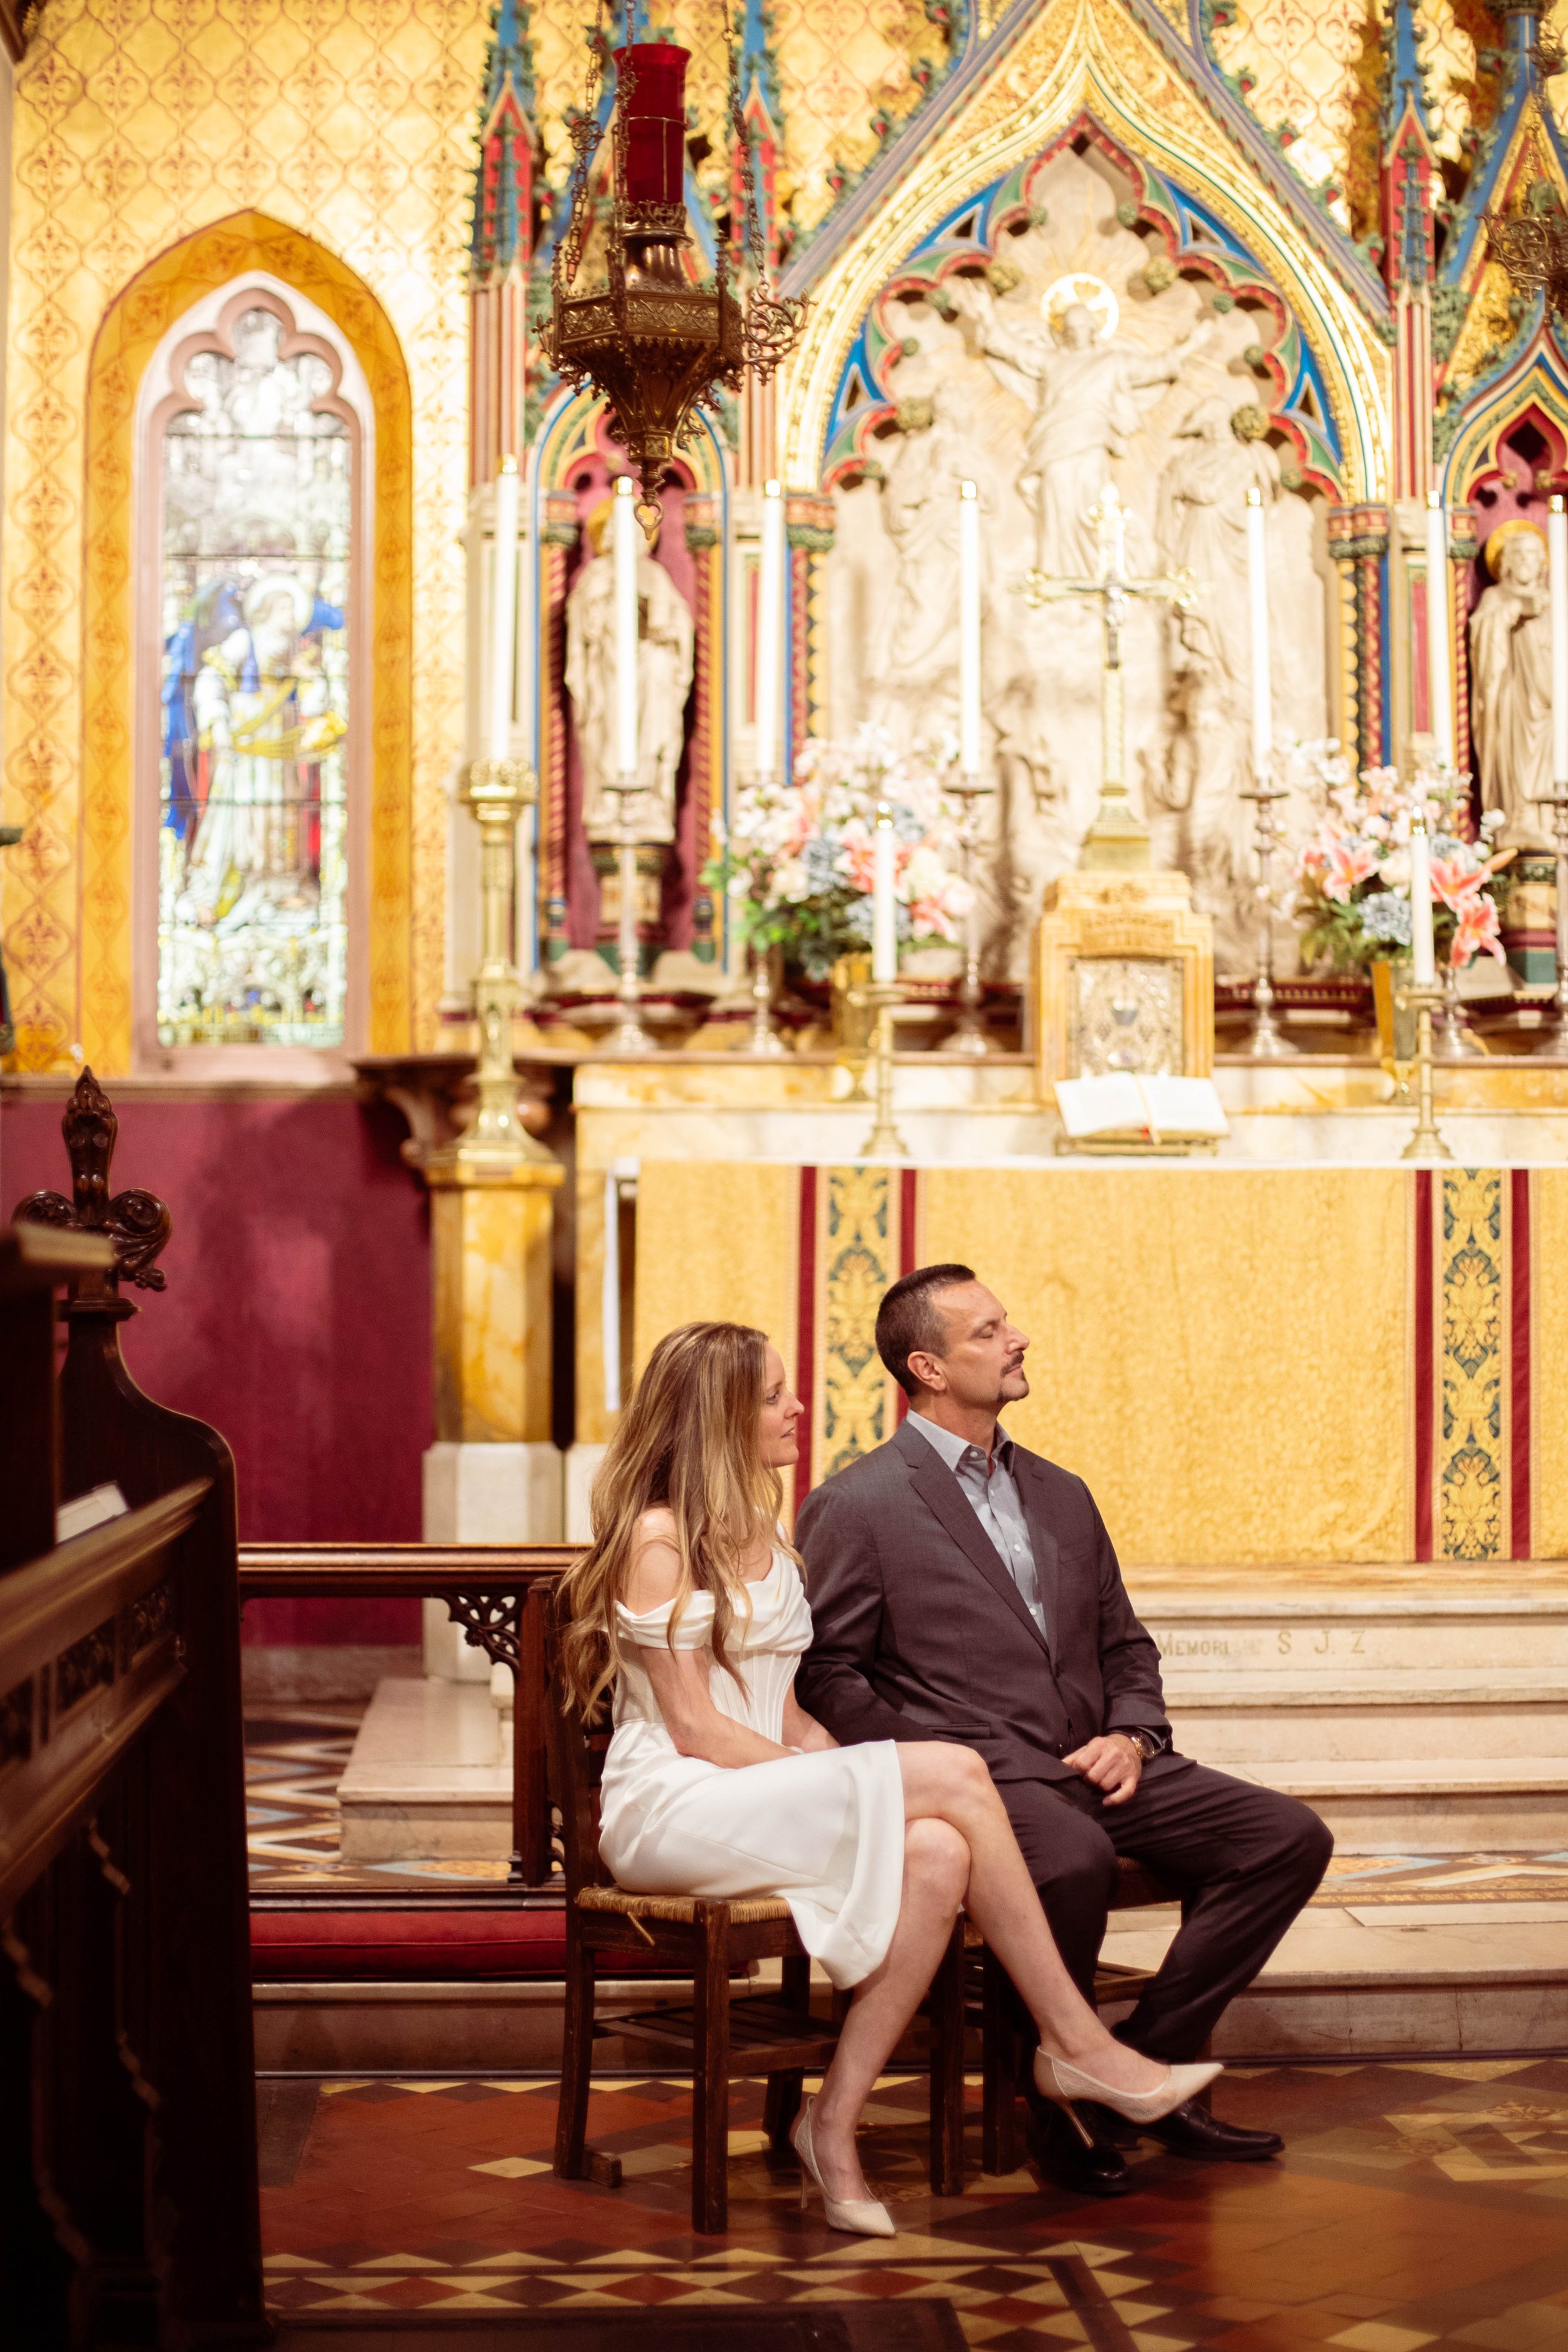 Capturing timeless love at the historic Church of the Transfiguration in Manhattan. 💒 #NYCWeddingPhotographer #ManhattanElopement